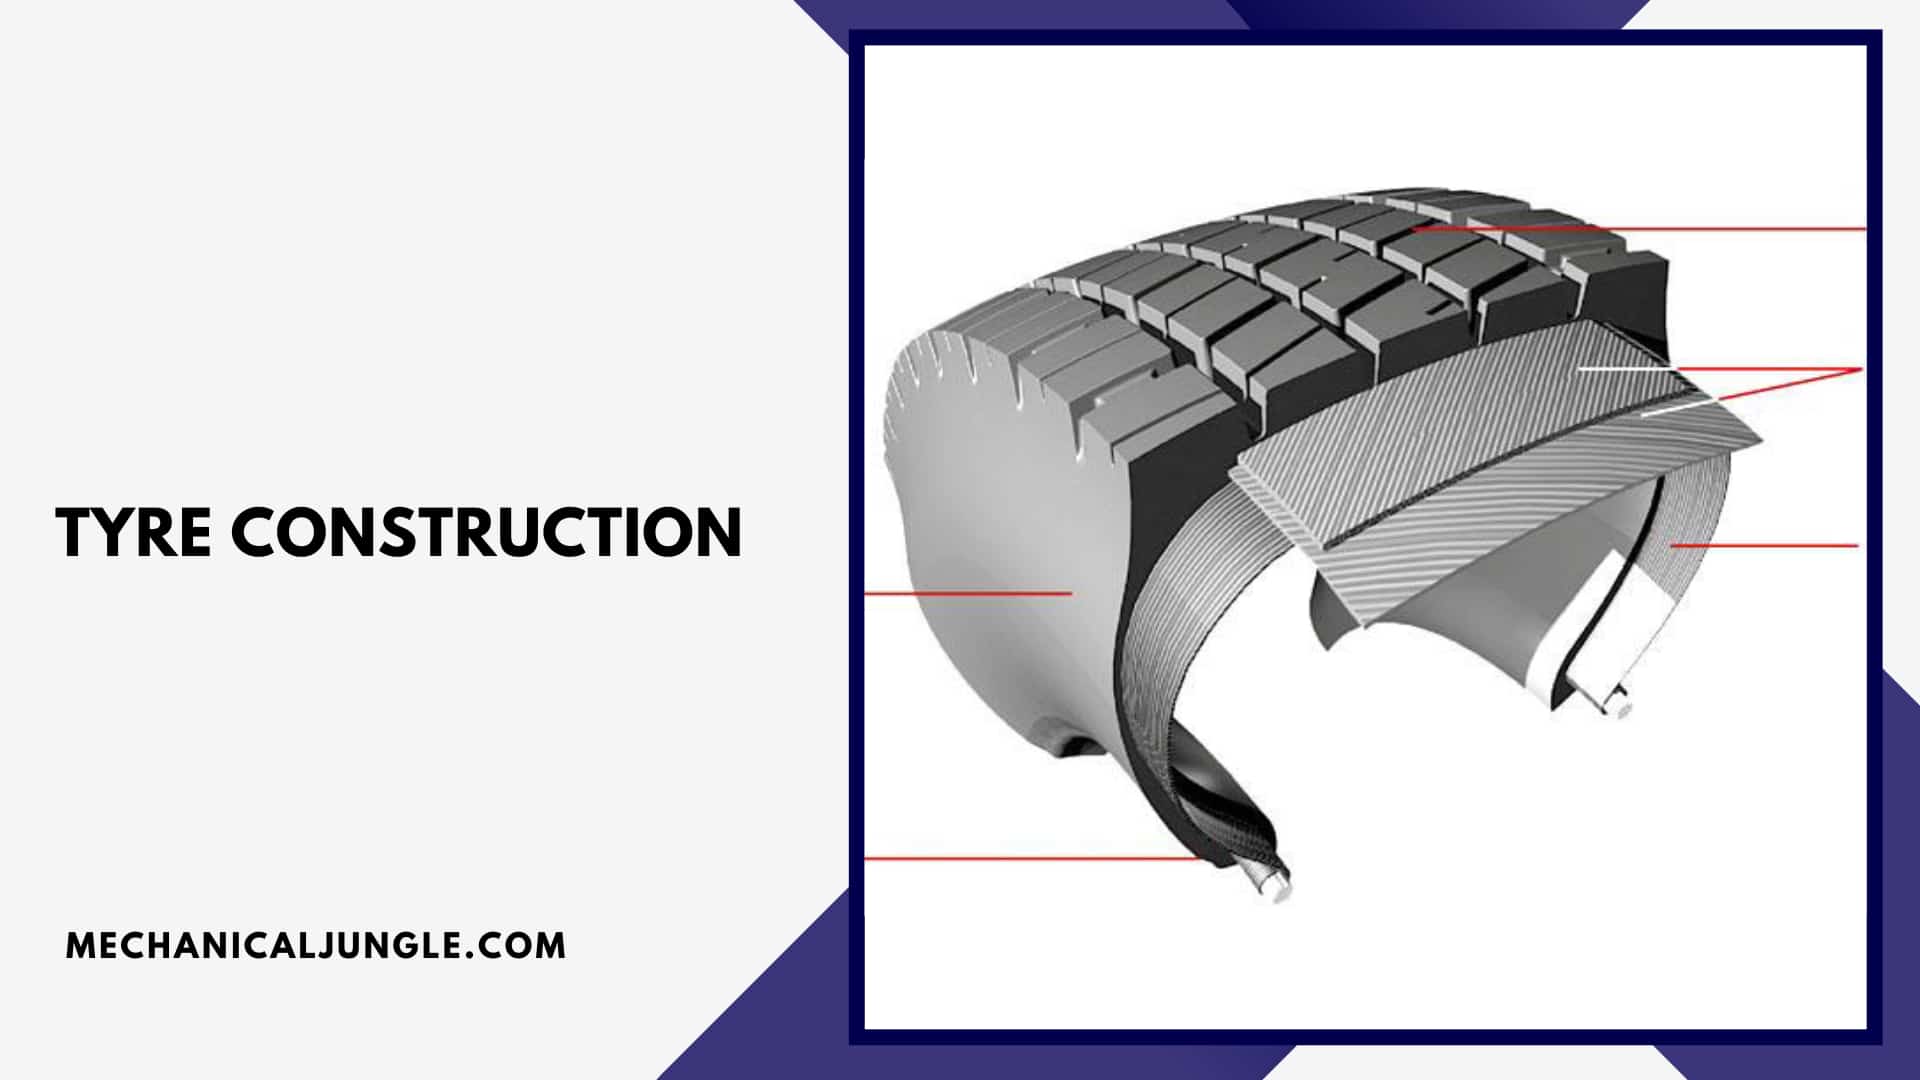 Tyre Construction